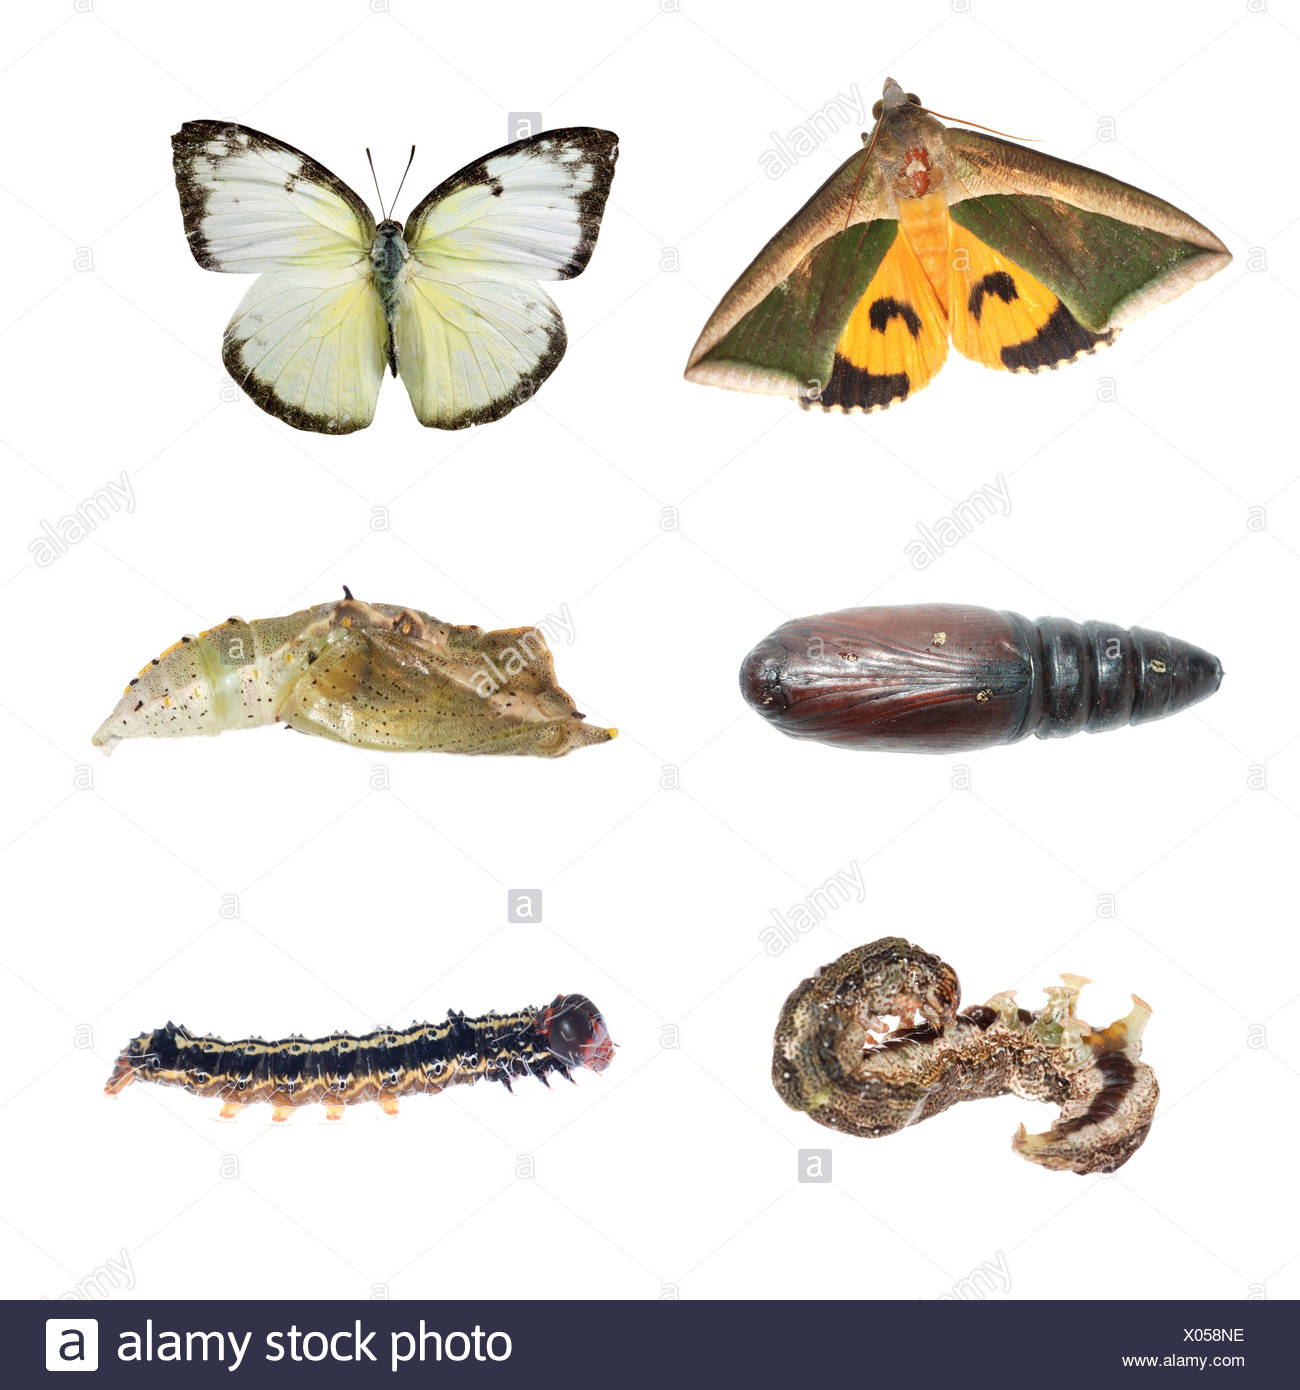 Caterpillars Life Cycle - Get Images